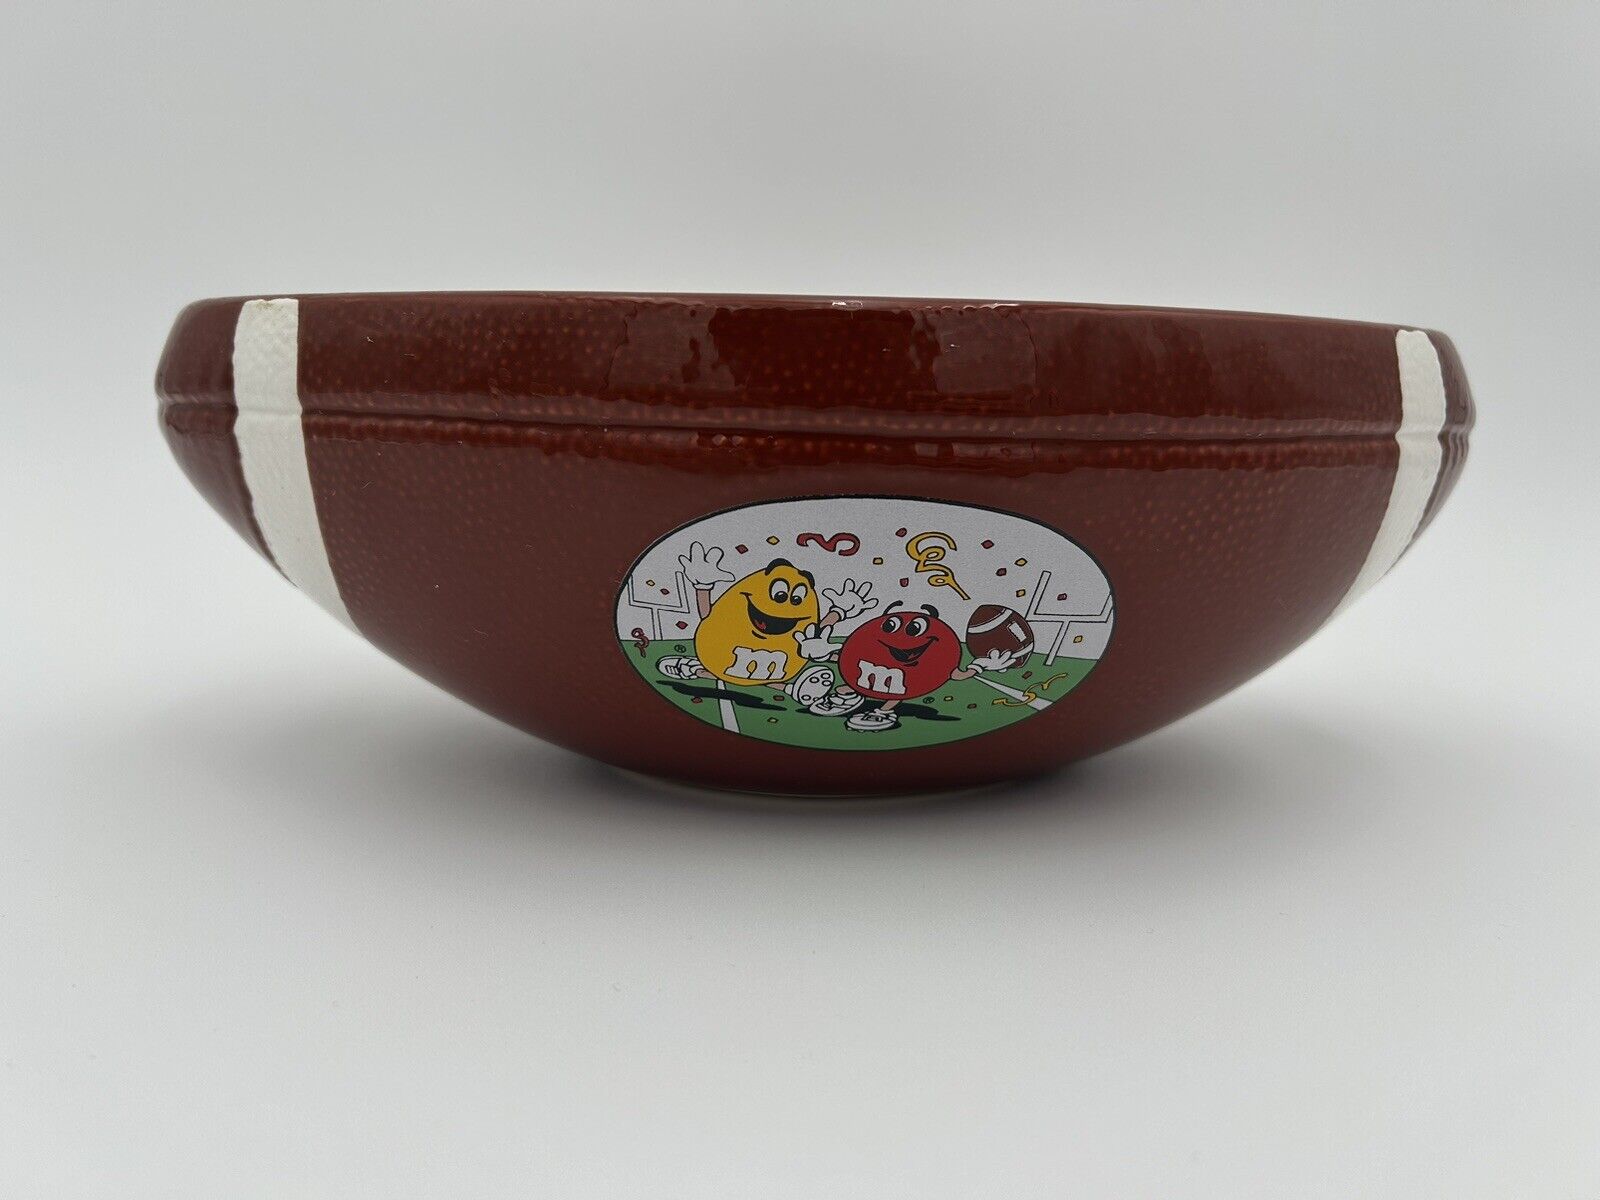 1980’s M&M Football Shaped Ceramic Candy Dish Divided Bowl w/ M&M’s Design